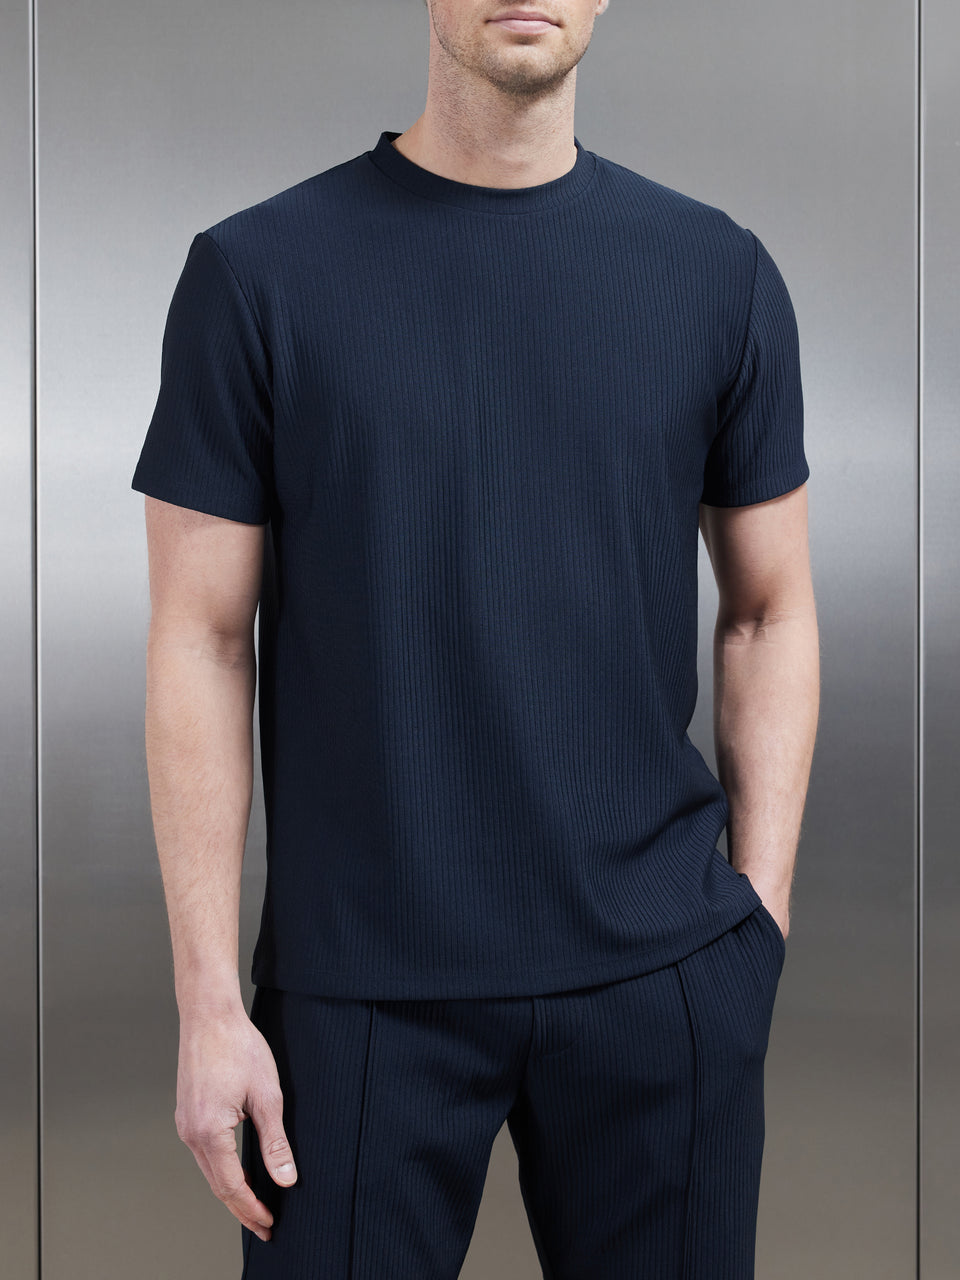 Pleated T-Shirt in Navy